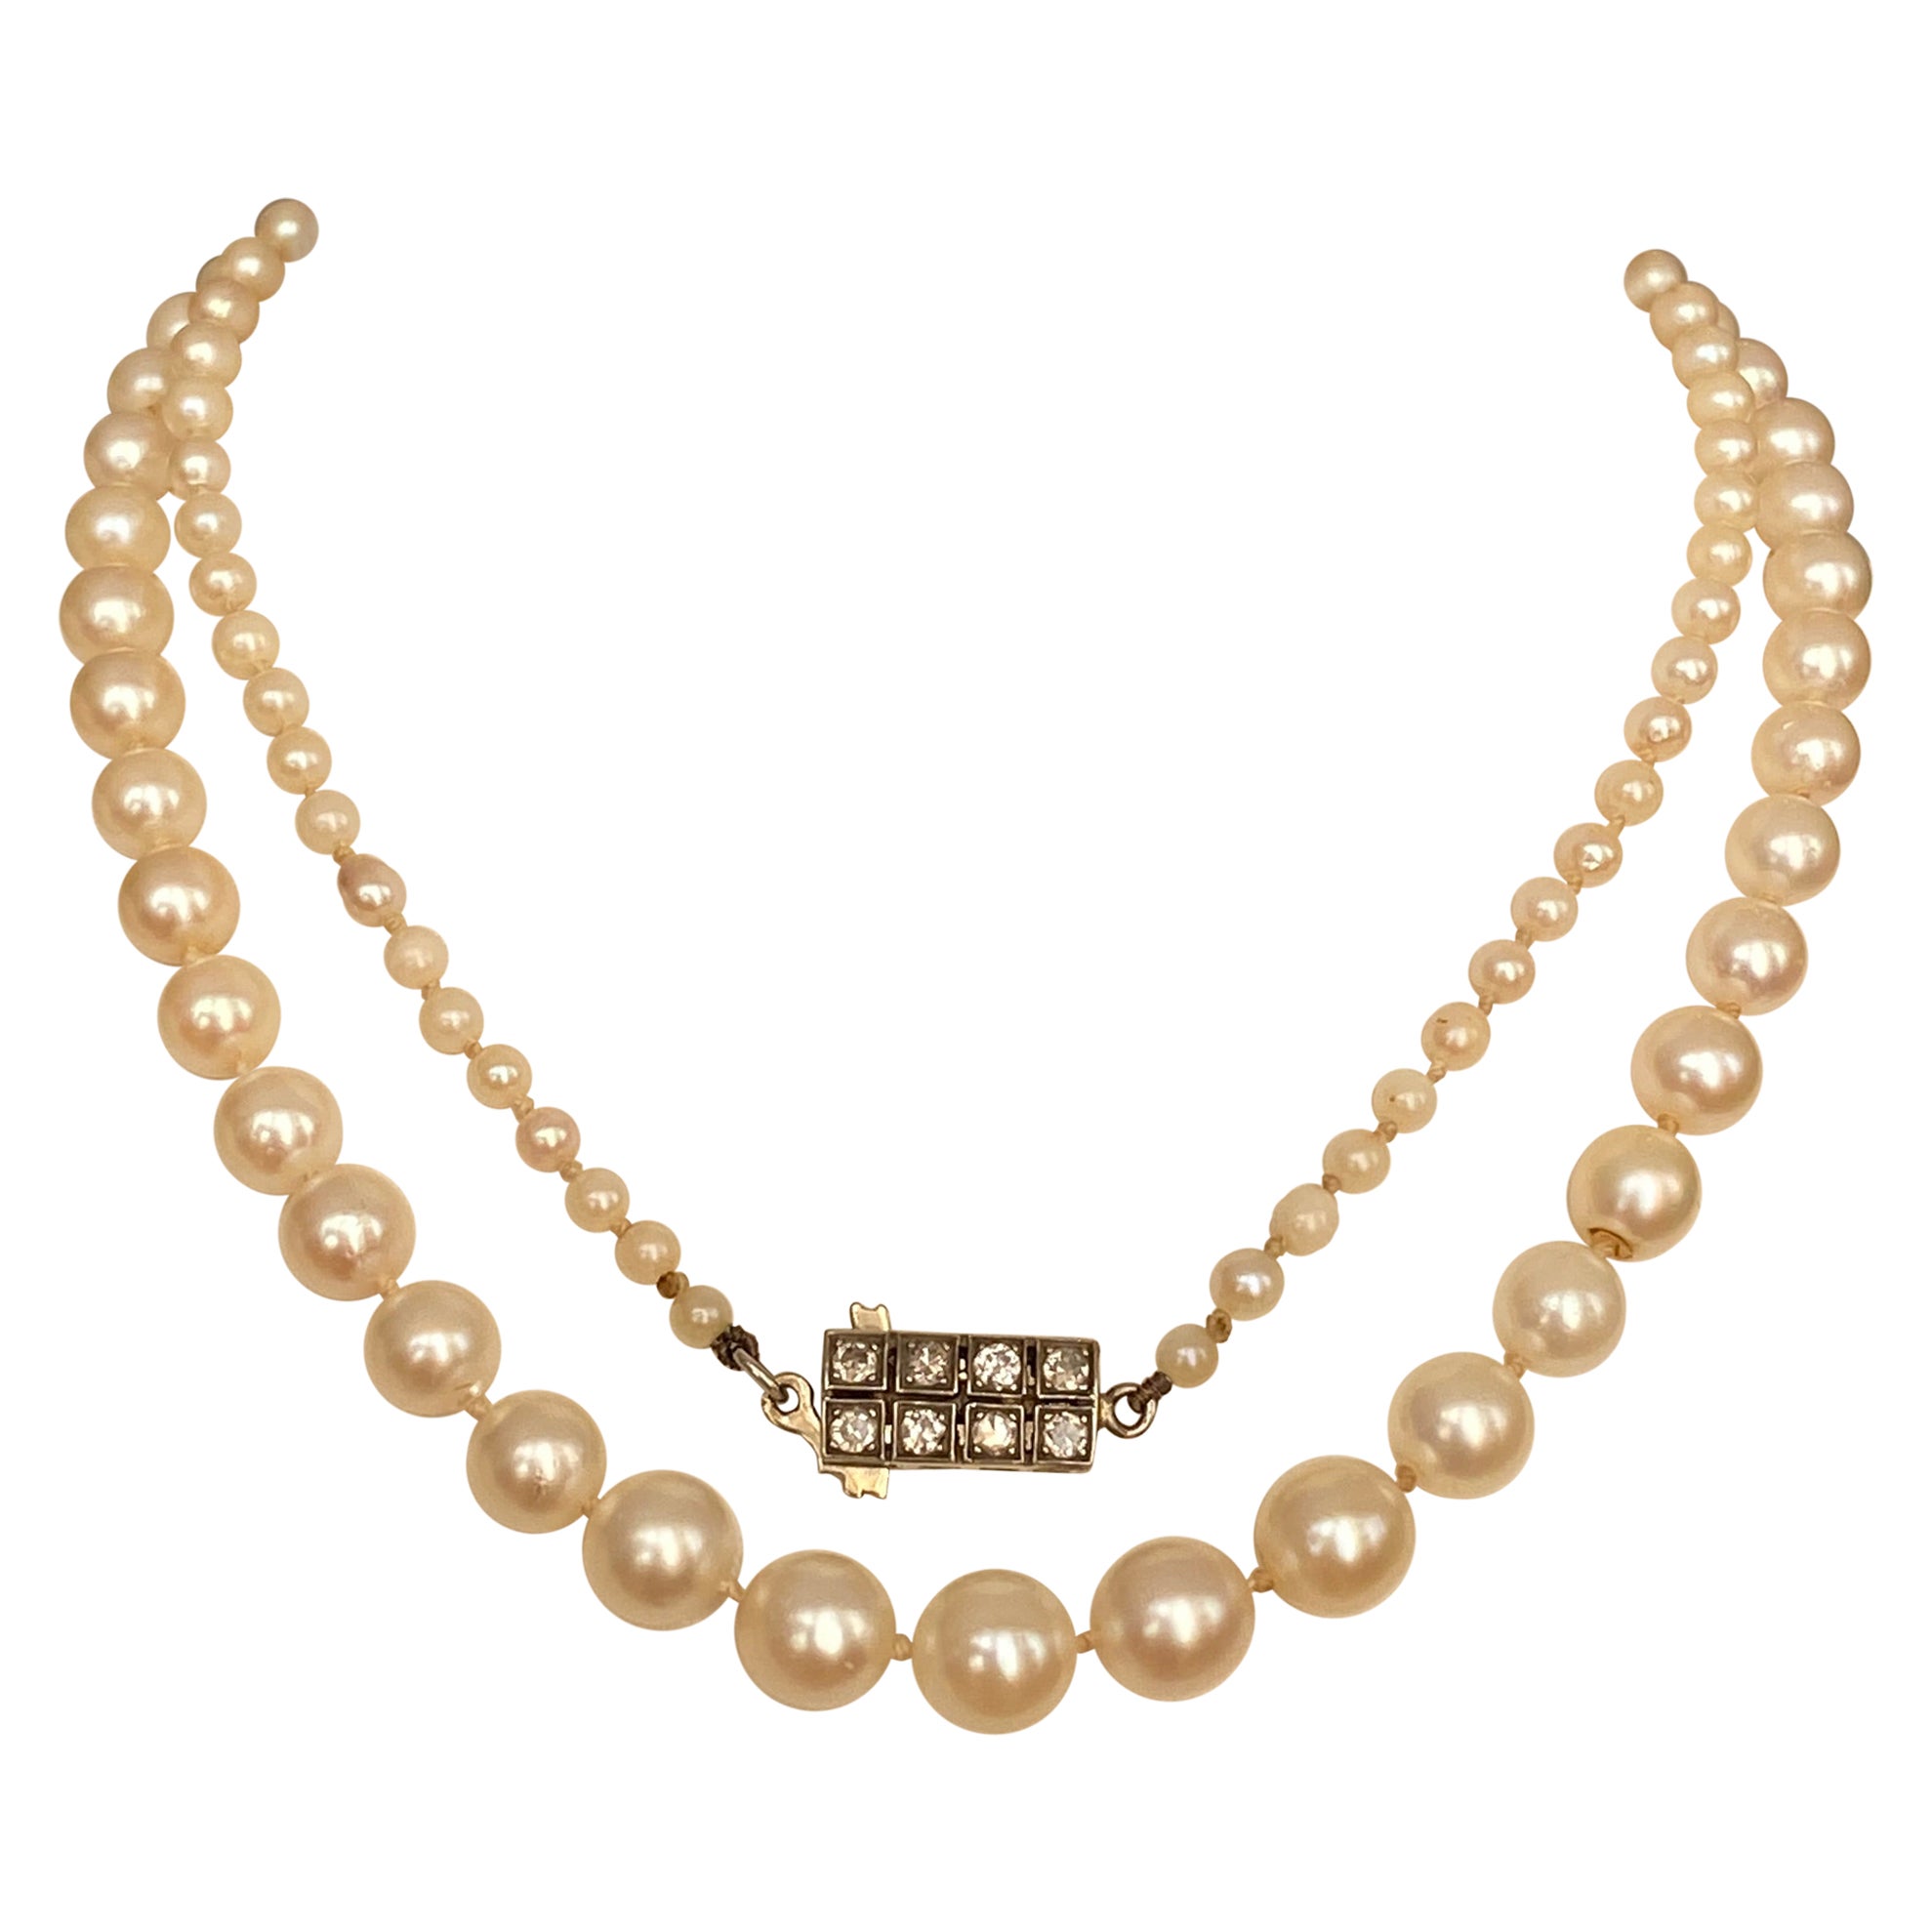 Pearl Necklace Art Deco Circa 1940s Cultured Akoya Pearls Diamond/Gold Clasp  For Sale